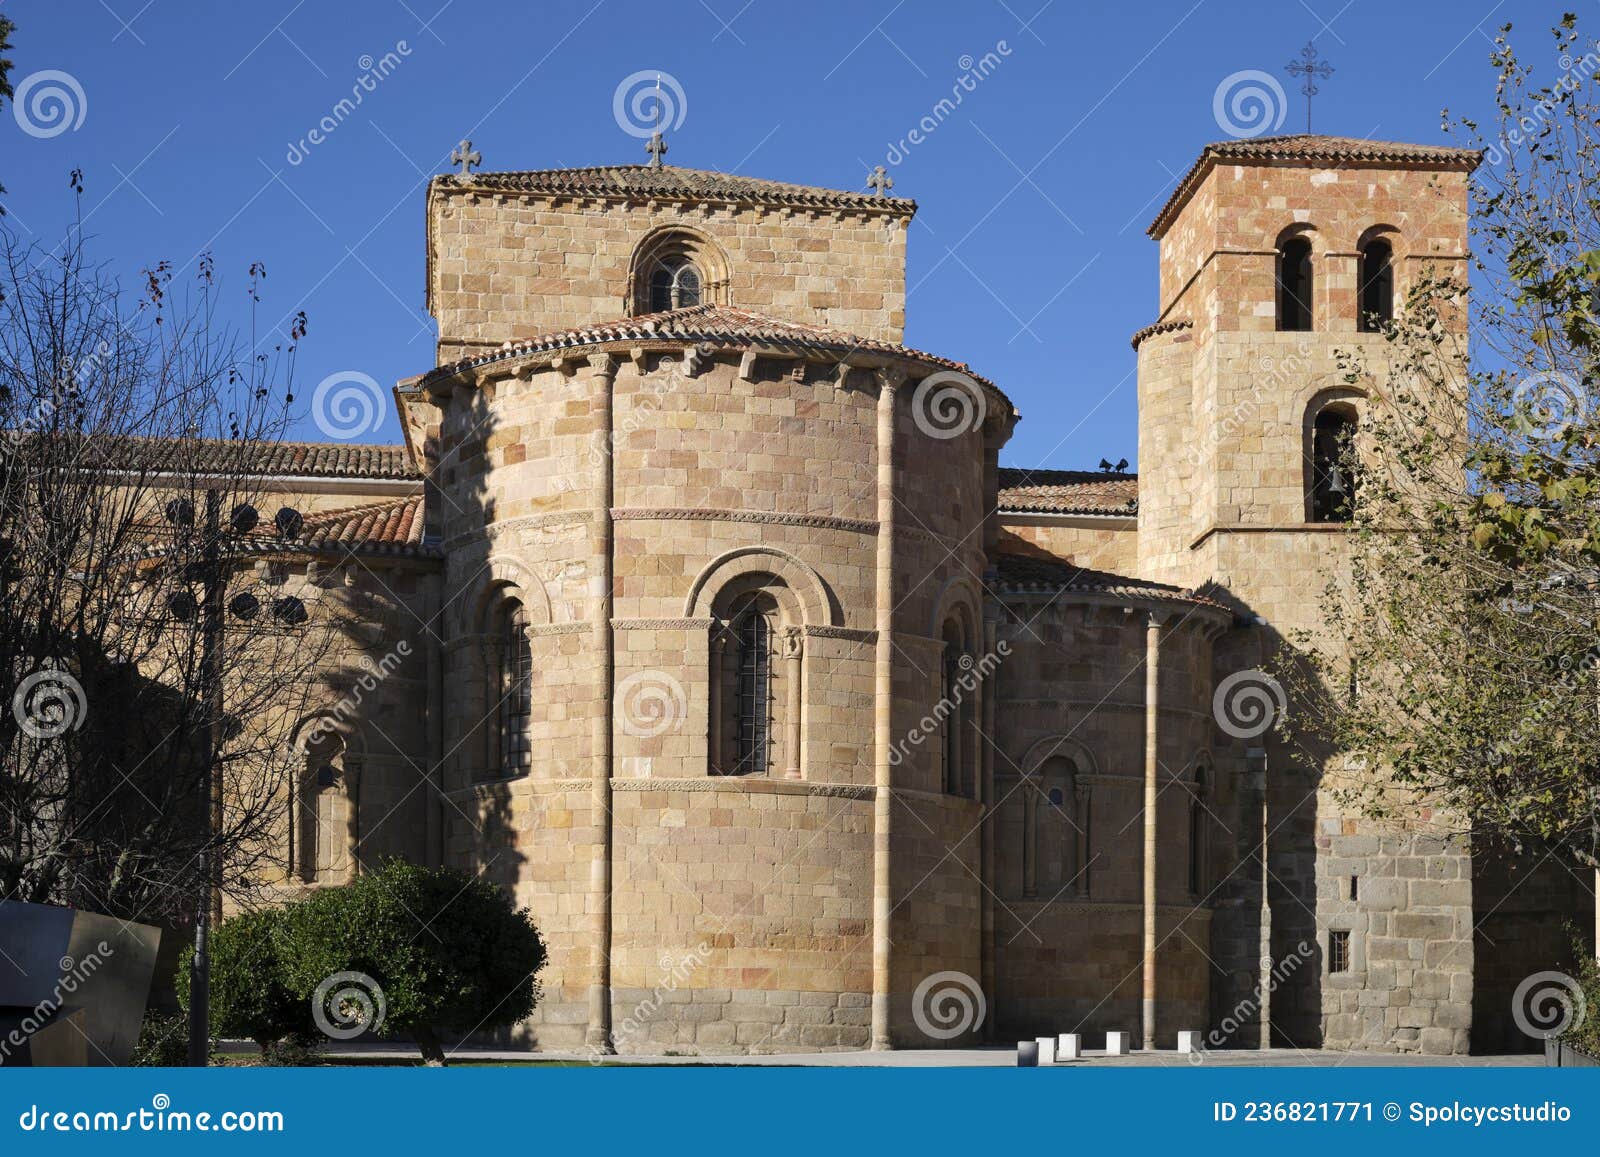 apse of the parish of st. peter the apostle in avila, spain.